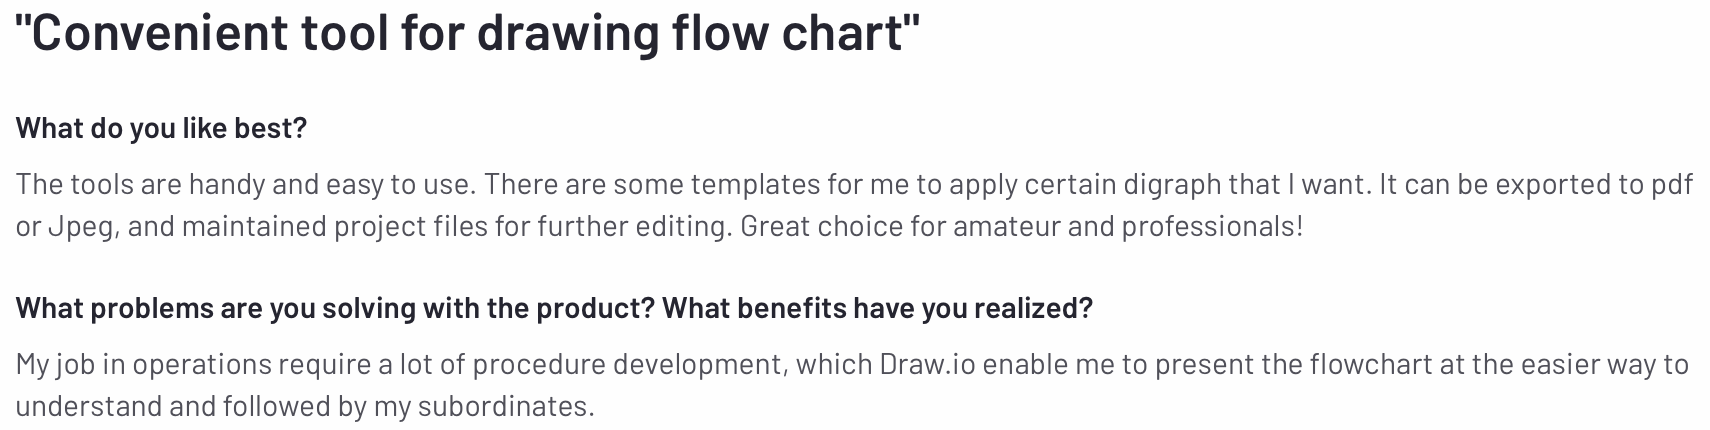 draw.io & diagrams.net review from real users on G2.com